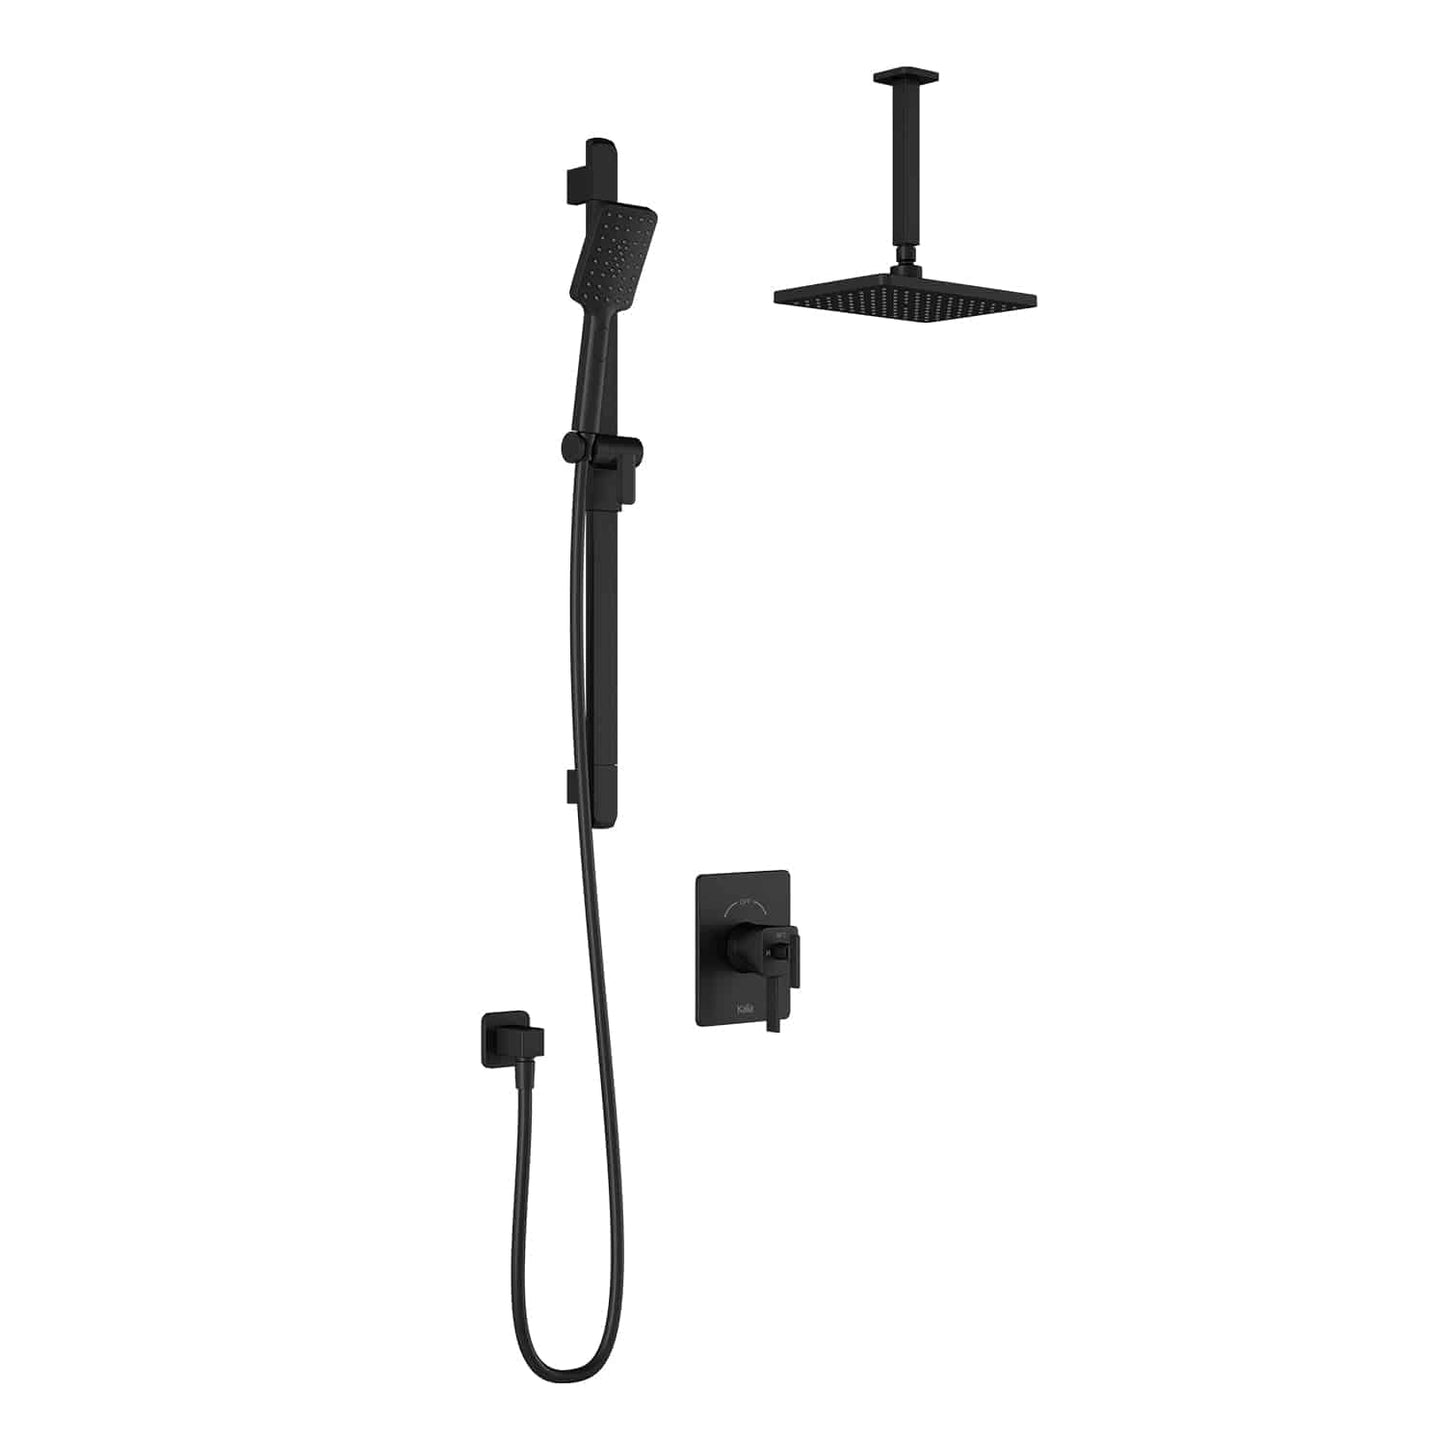 Kalia SquareOne TCD1 (Valve Not Included) AQUATONIK T/P Coaxial Shower System with Vertical Ceiling Arm- Matte Black